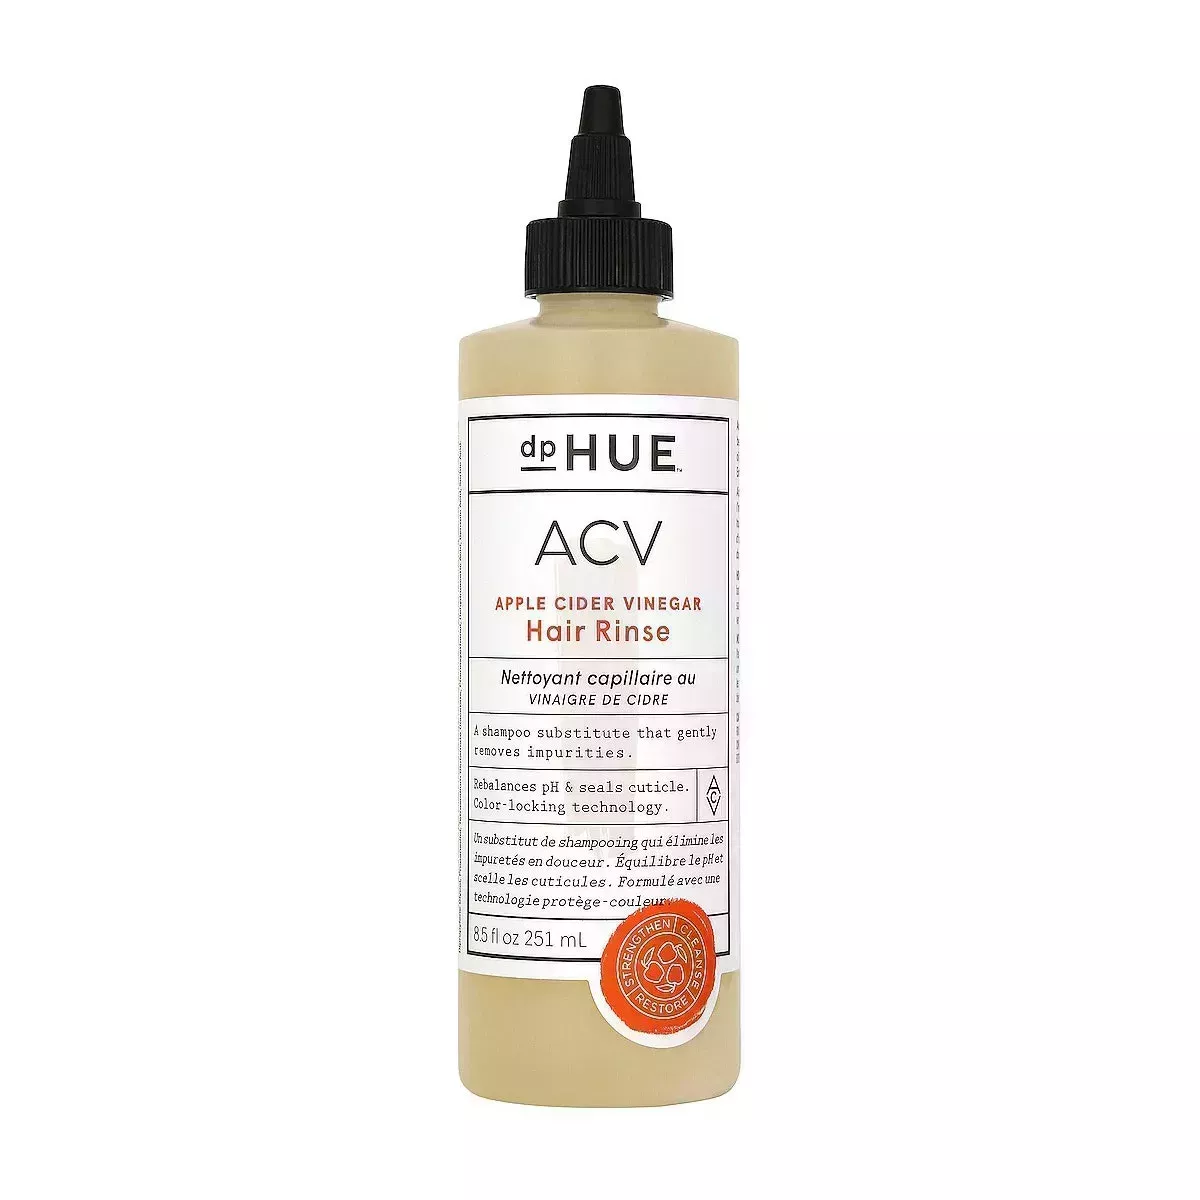 dpHue ACV Rinse translucent bottle of natural yellow hair rinse with black pointed cap on white background